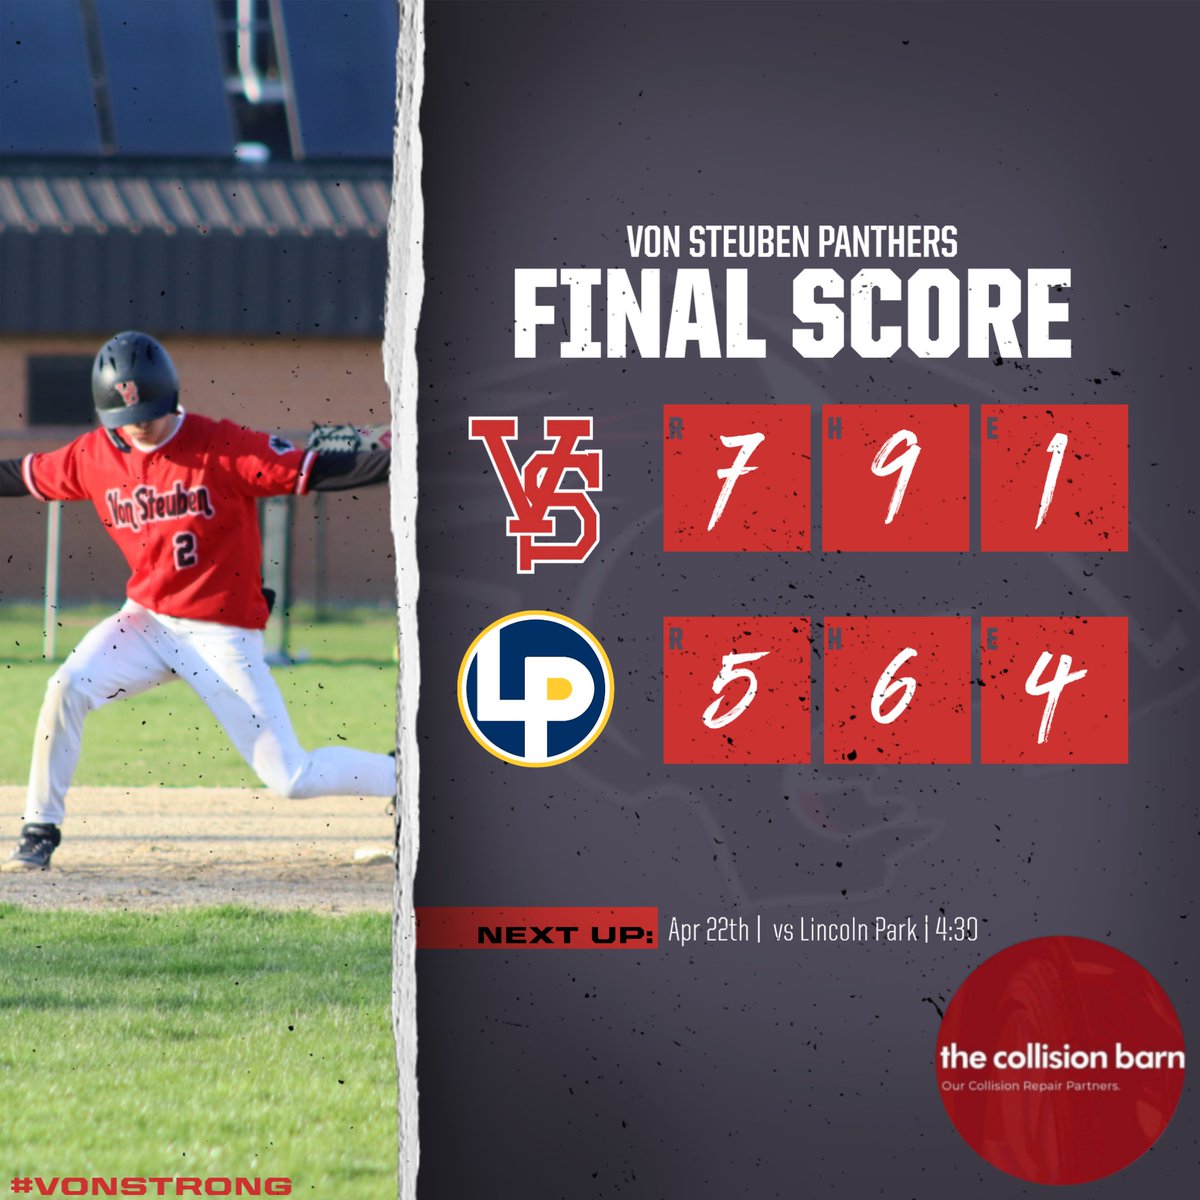 Von hangs on to defeat Lincoln Park 7-5 in JRN conference play. Kayin Timble drove in 2 runs for the Panthers. George Allen and Jalen Travis recorded 2 hits each. Von resumes its suspended game with Taft tomorrow at 2pm. Go Panthers! @cplathletics @mikeclarkpreps @vonsteubenmsc